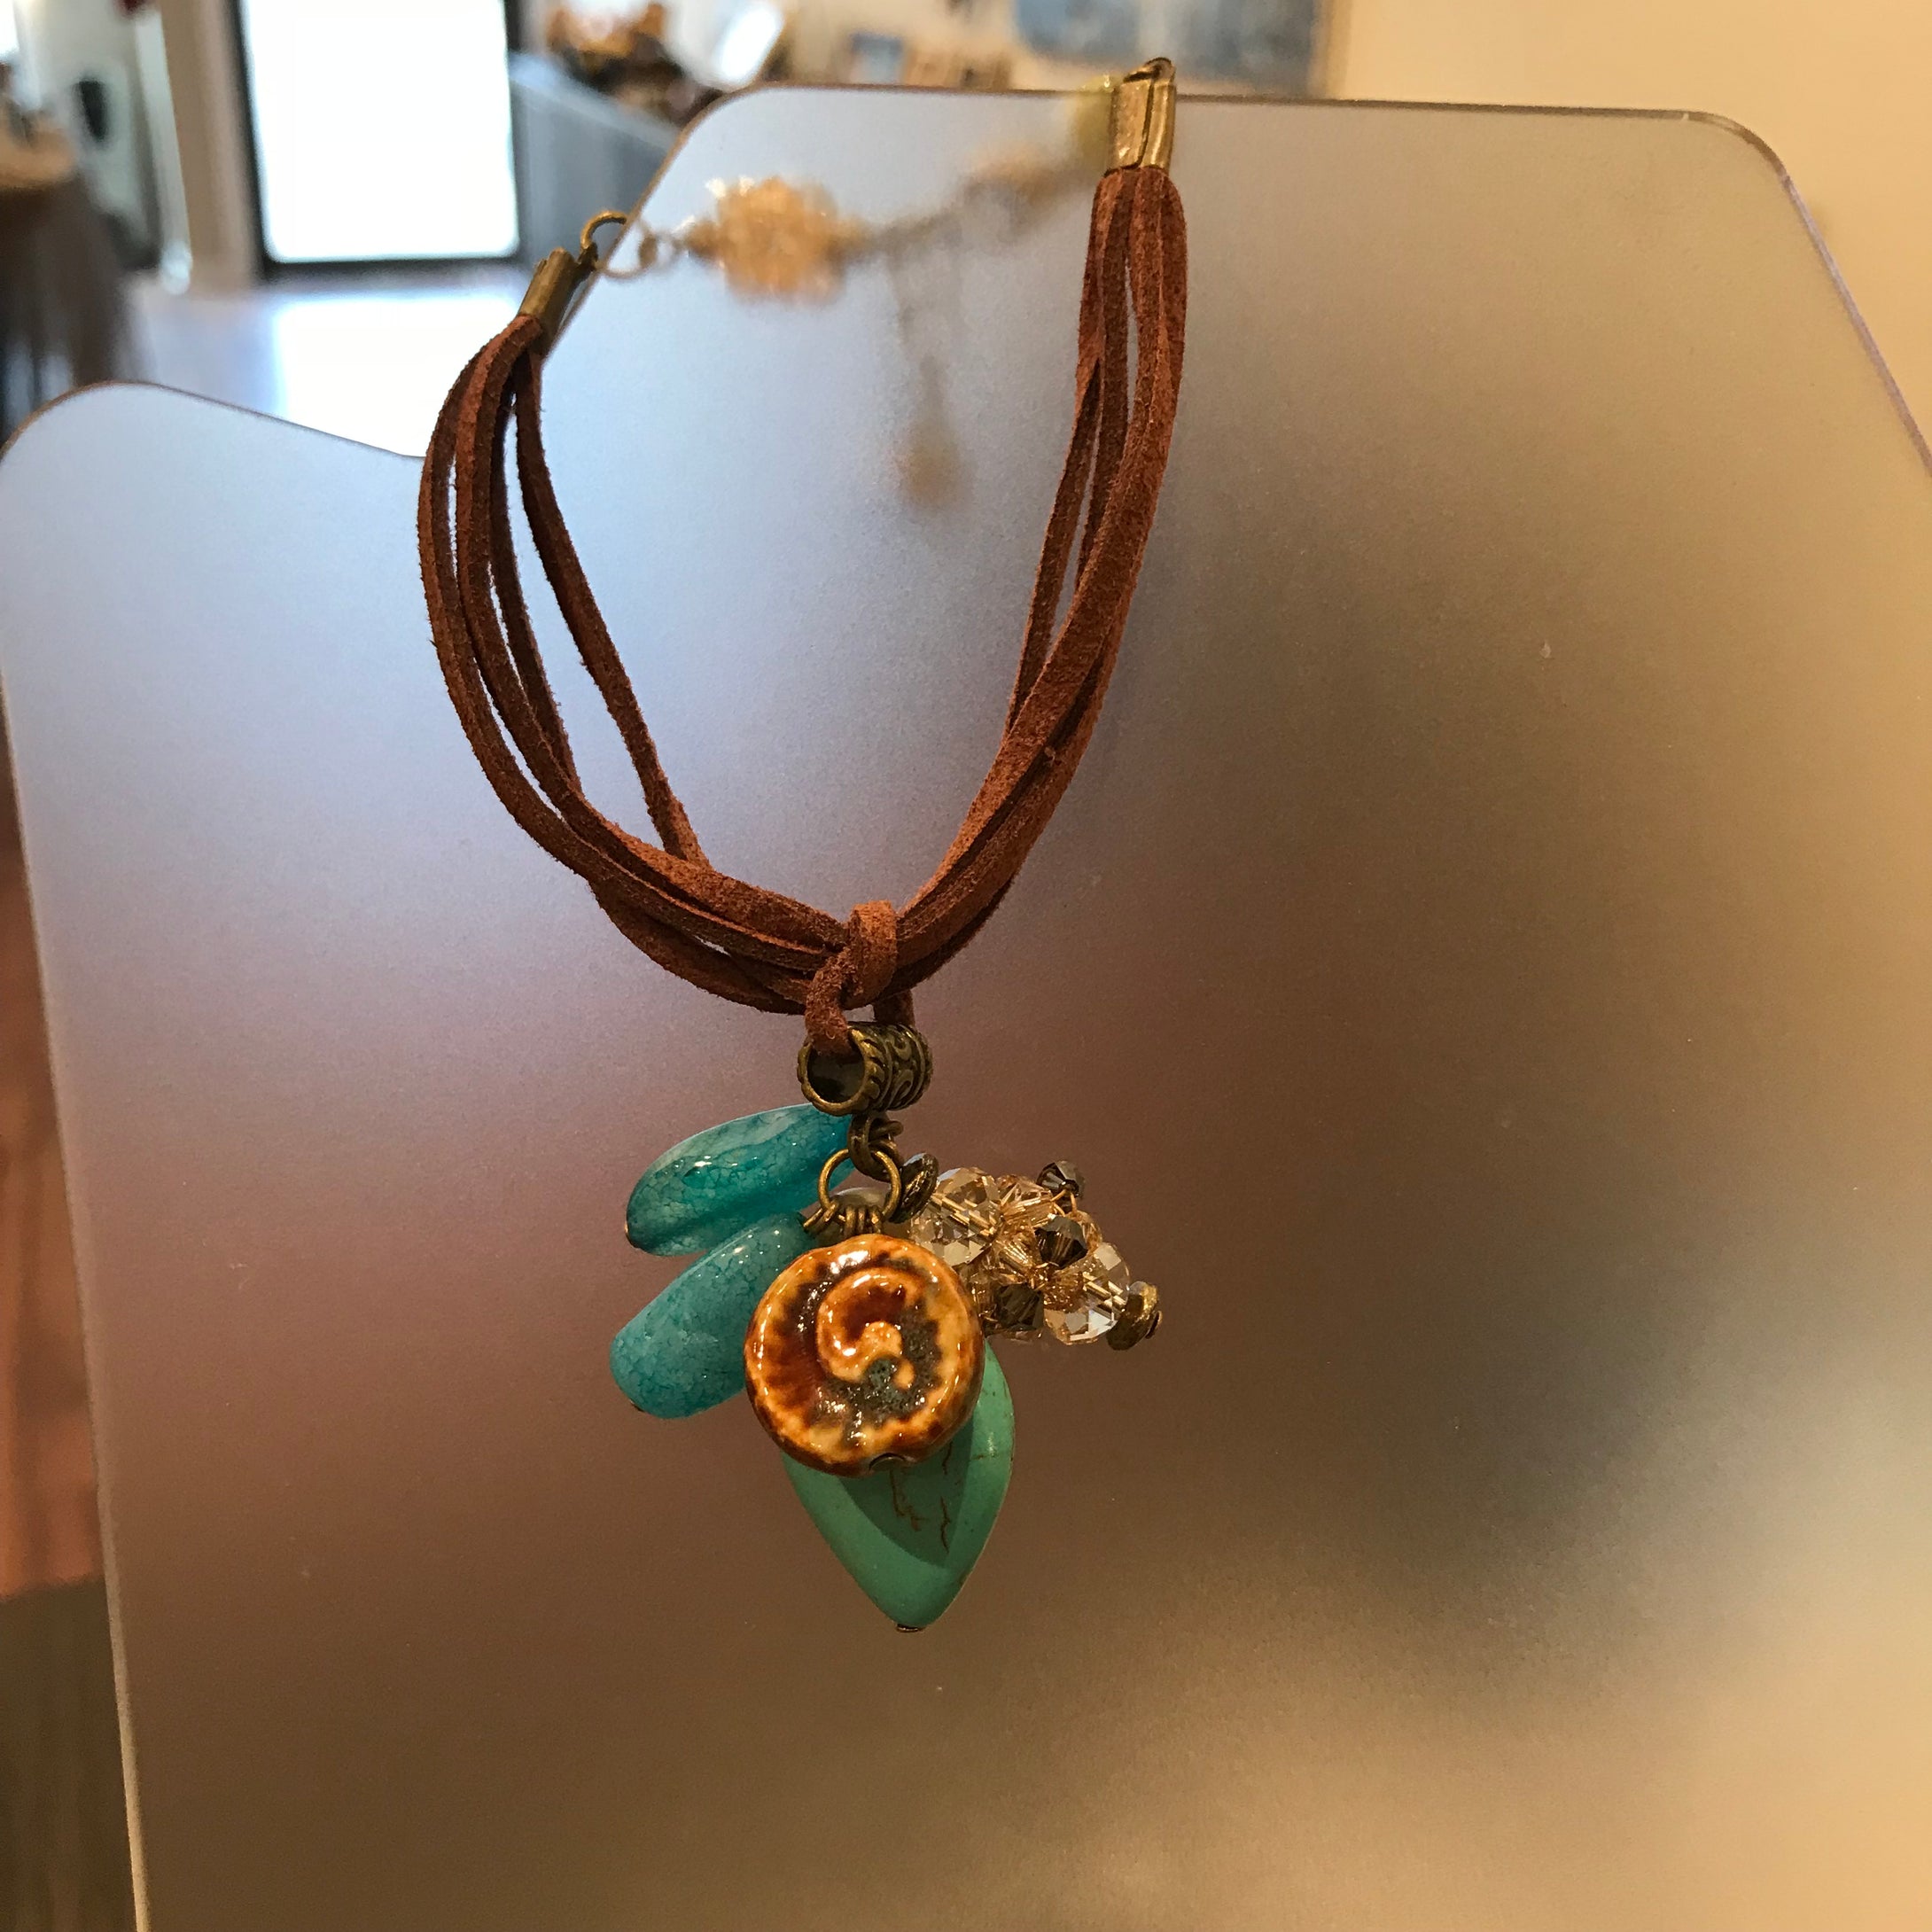 Hand made Jewelry with real turquoise Stone